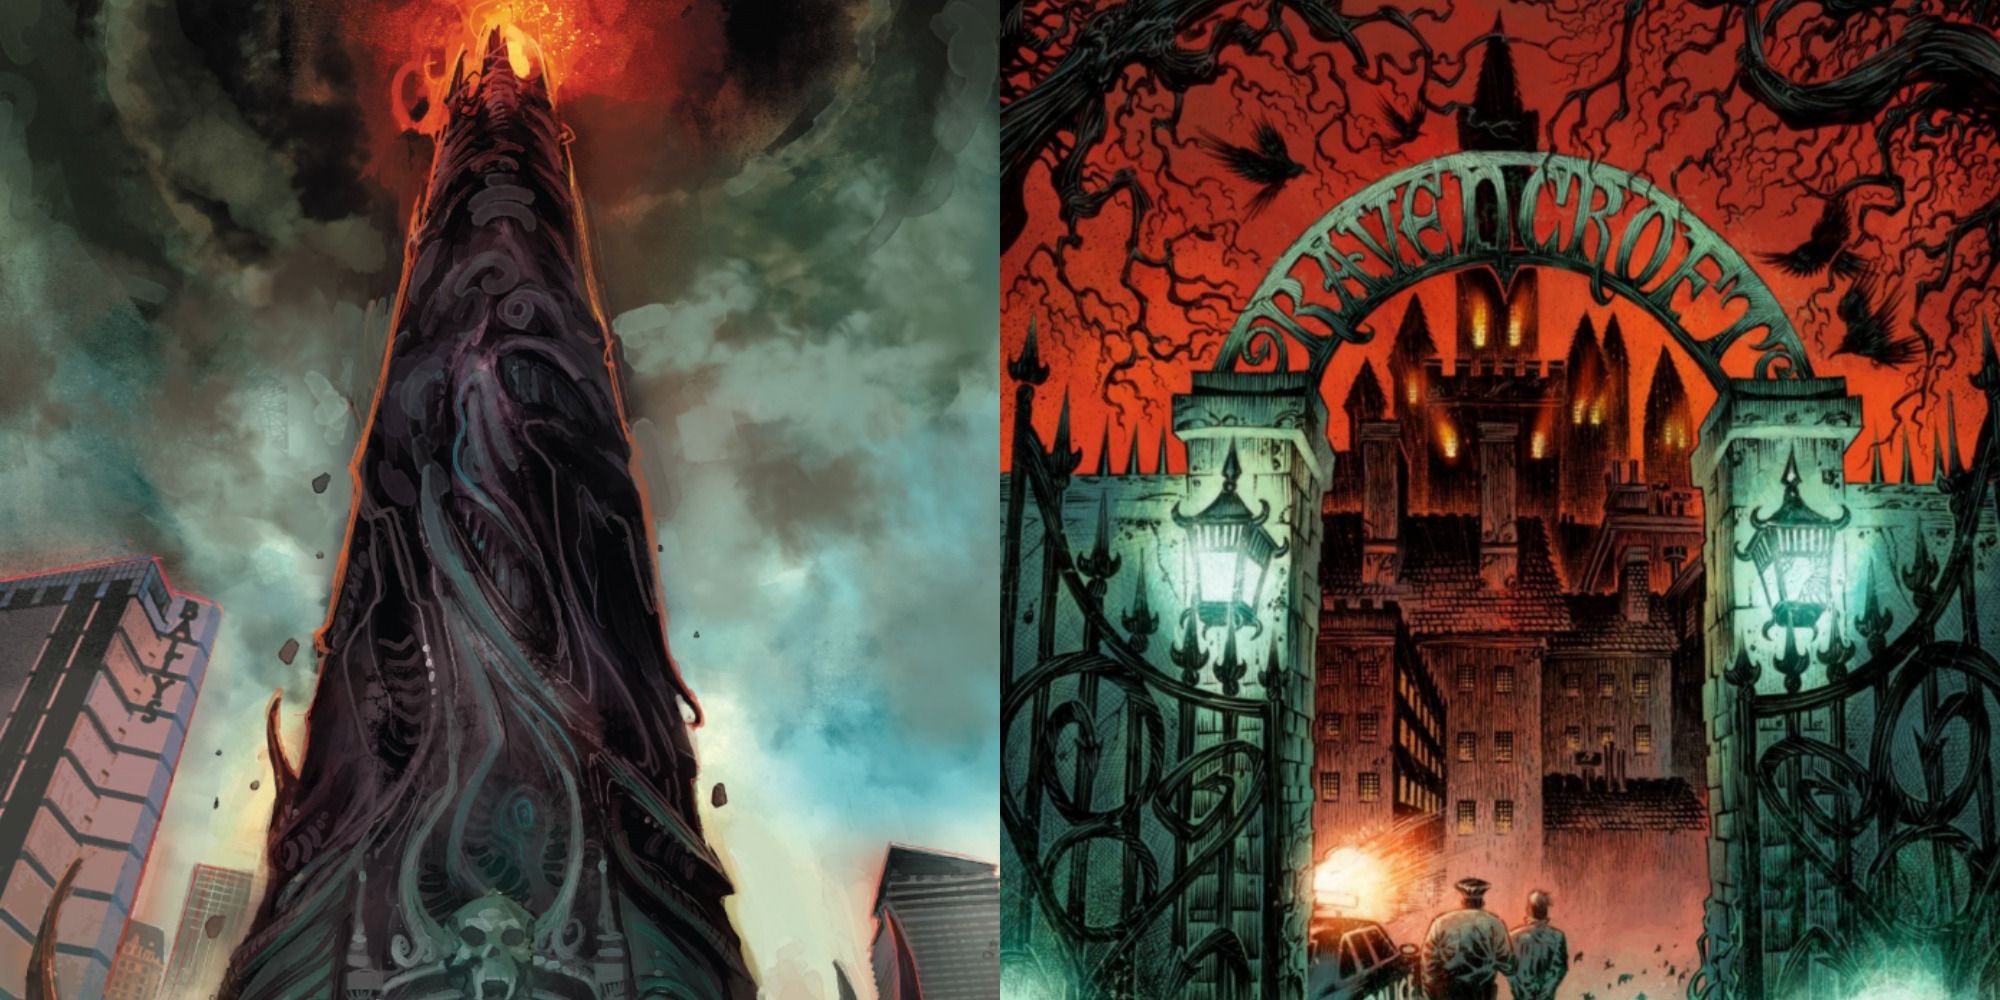 Split image of the Hotel Inferno & the Ravencroft Institute at night in Marvel Comics.